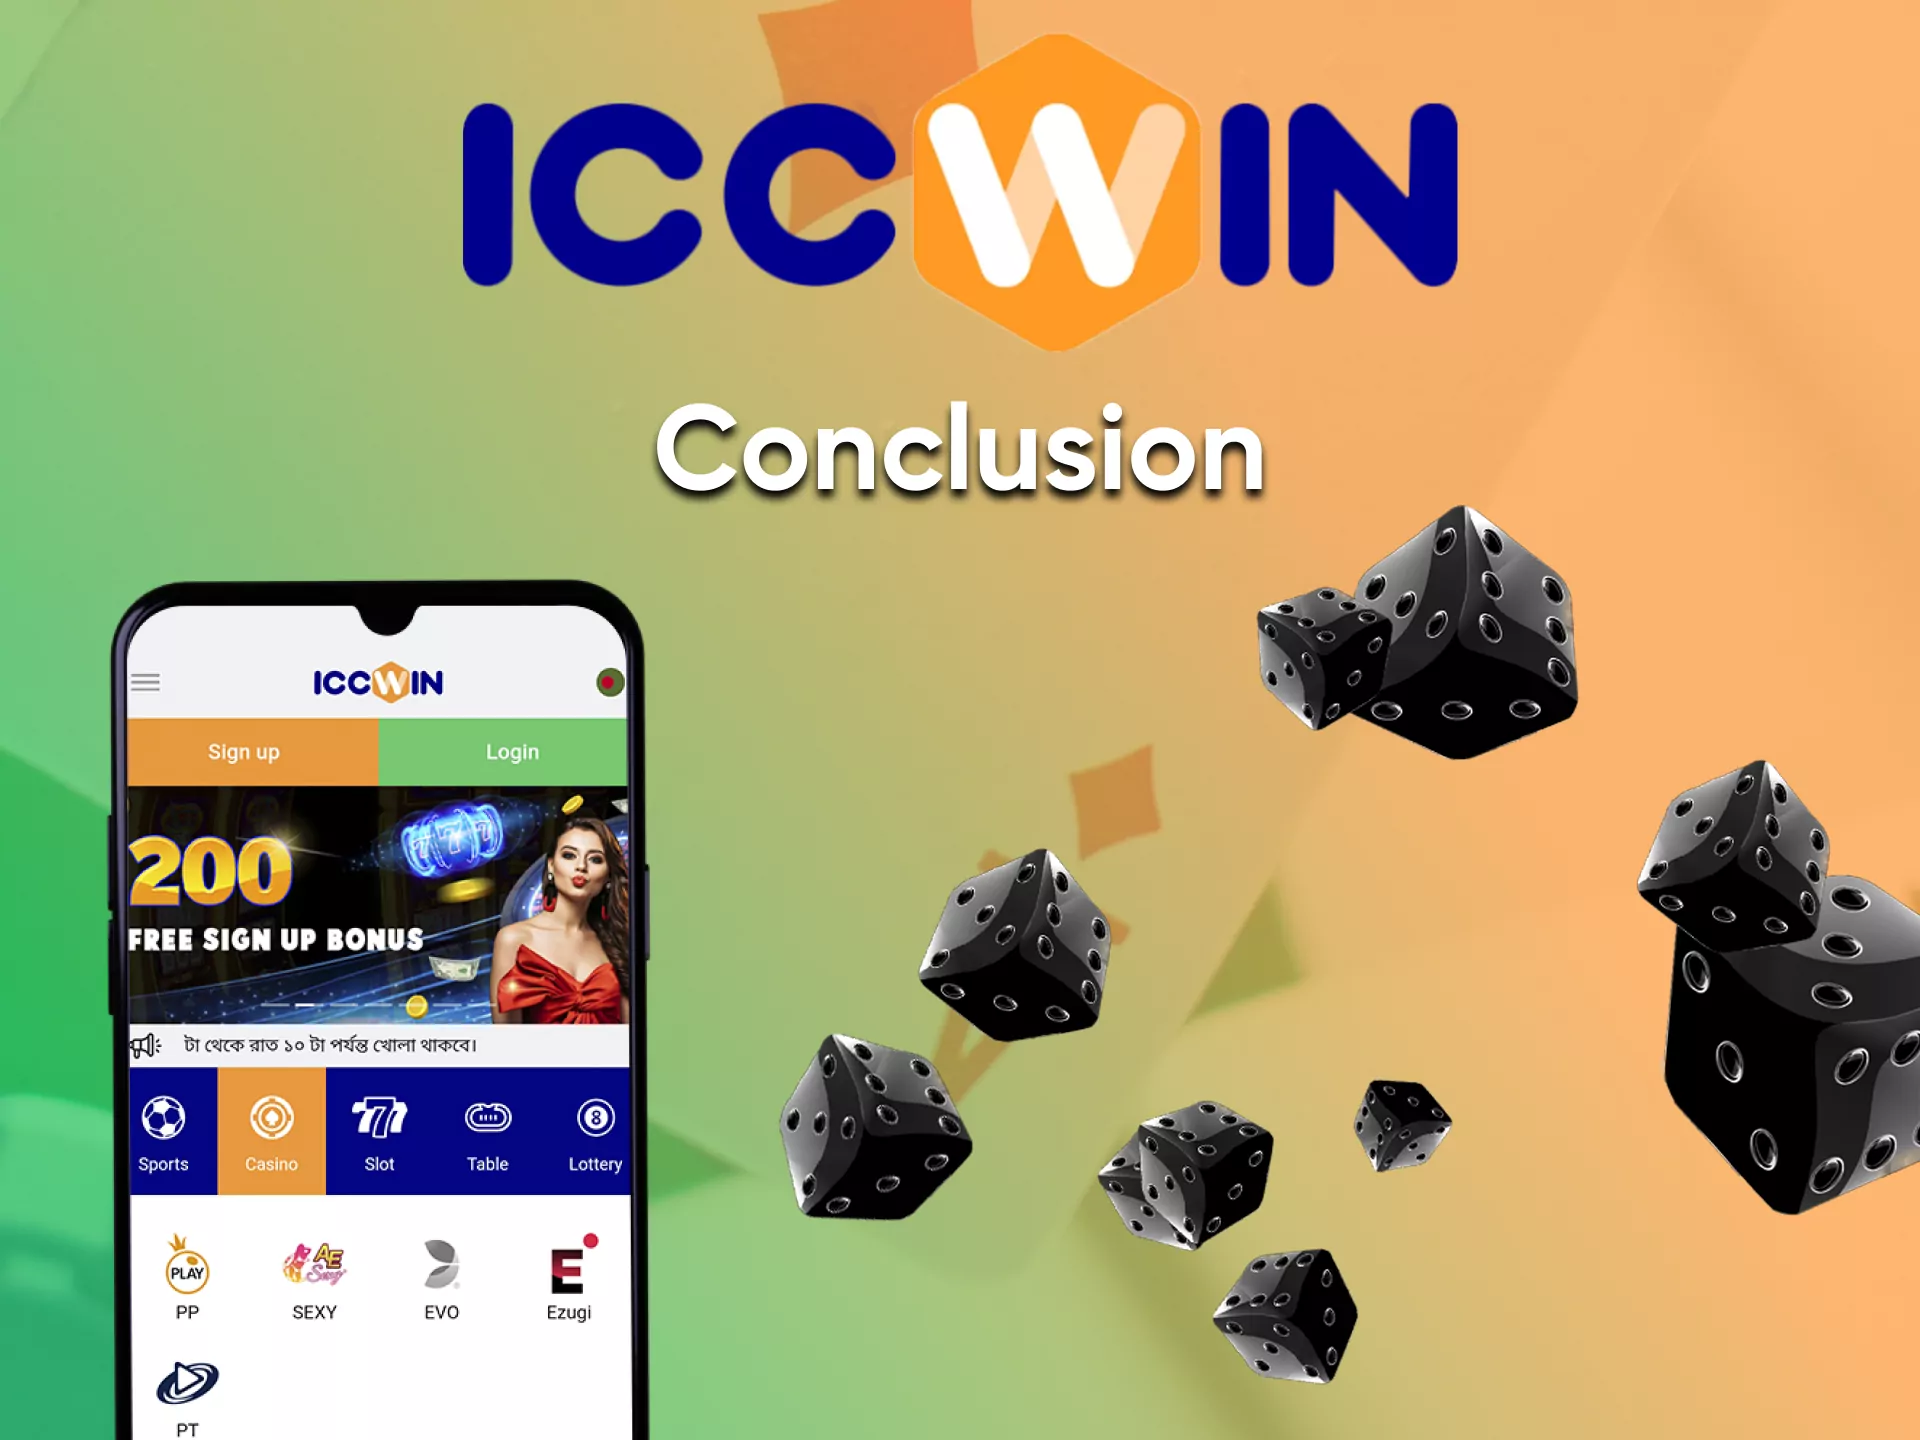 Play at a proven casino from ICCWin.